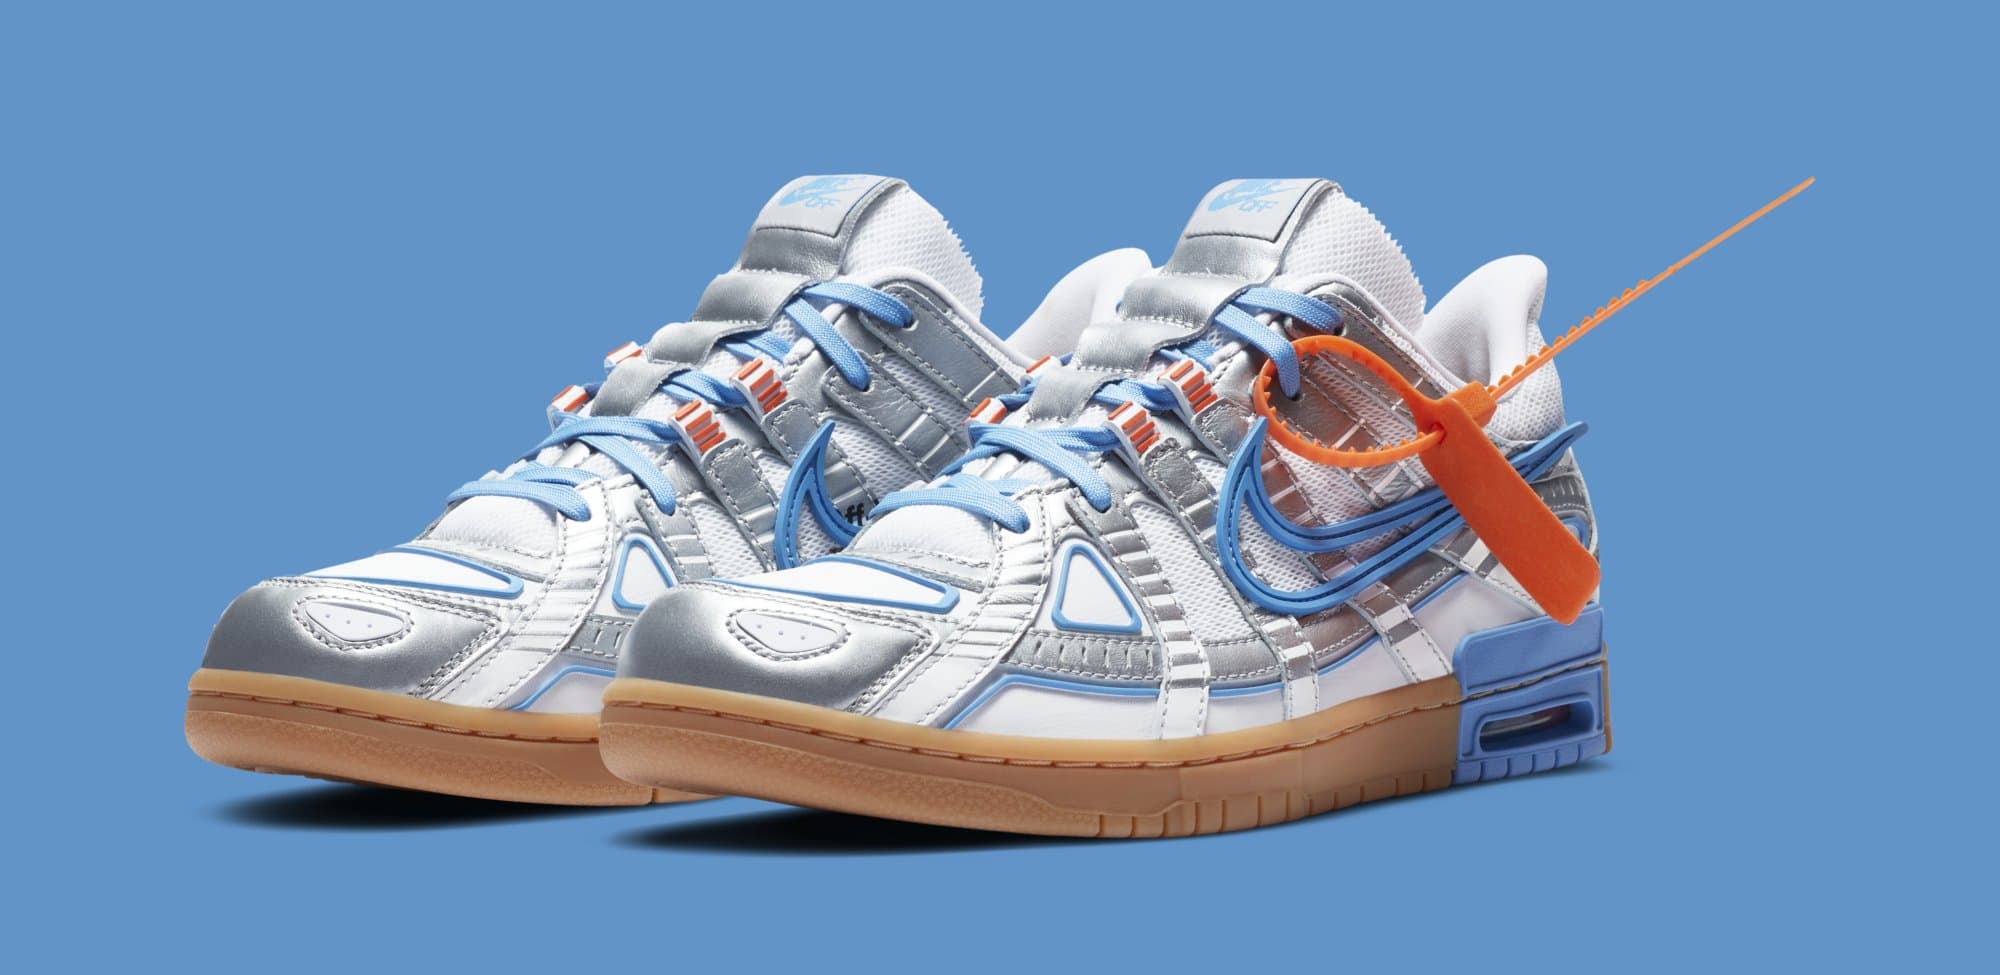 Nike Off White x Air Rubber Dunk University Gold